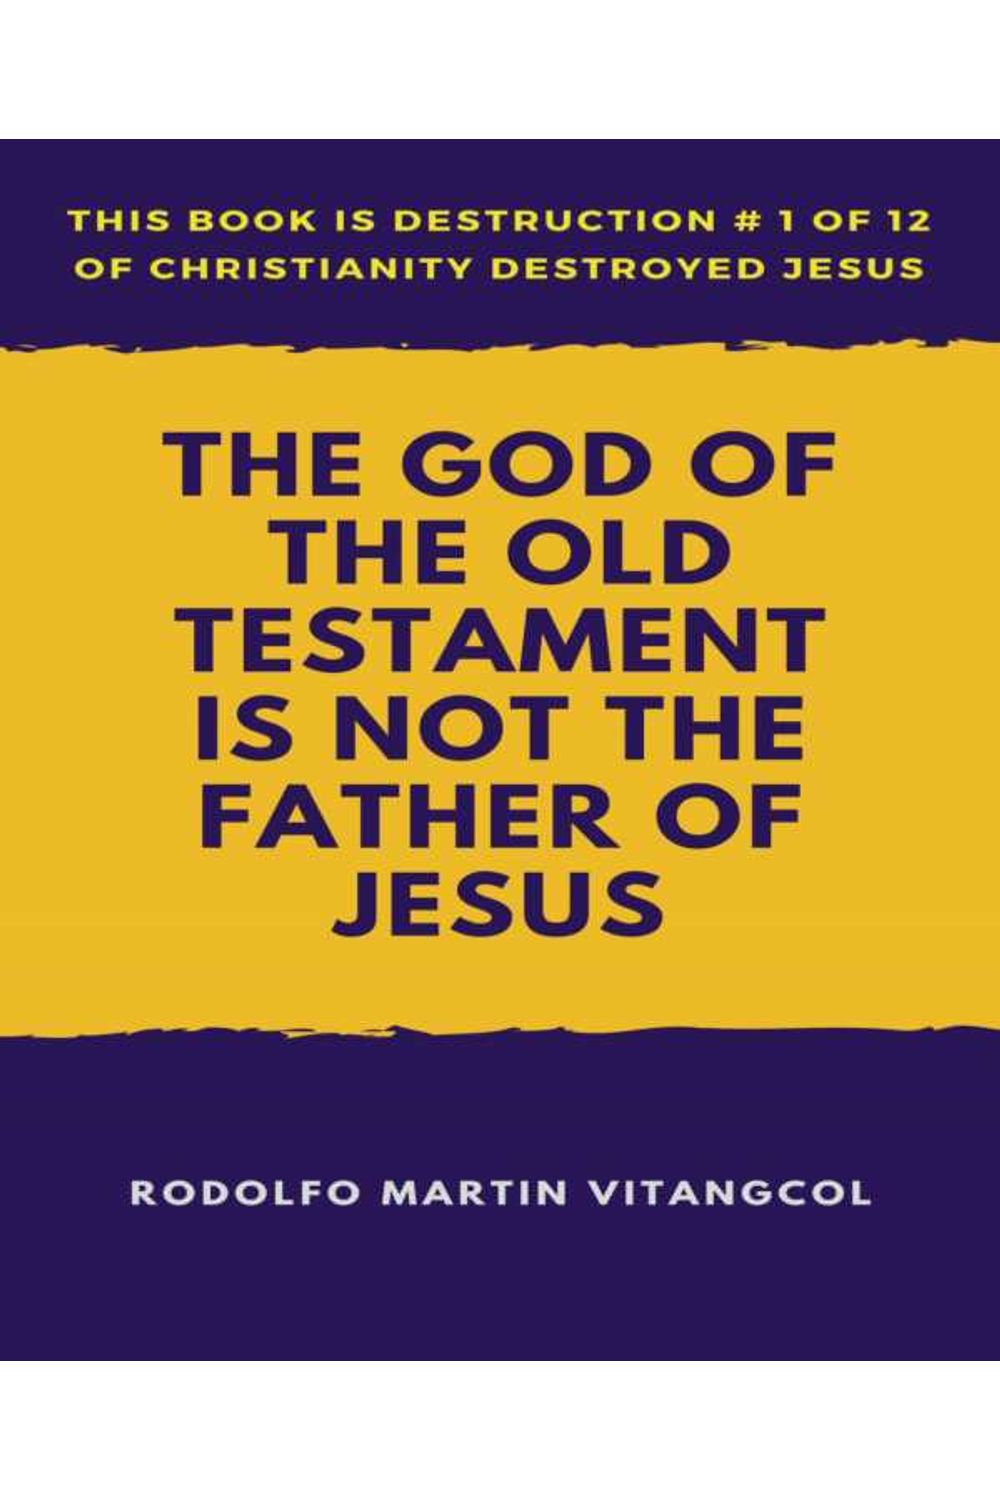 bw-the-god-of-the-old-testament-is-not-the-father-of-jesus-bookrix-9783743894686